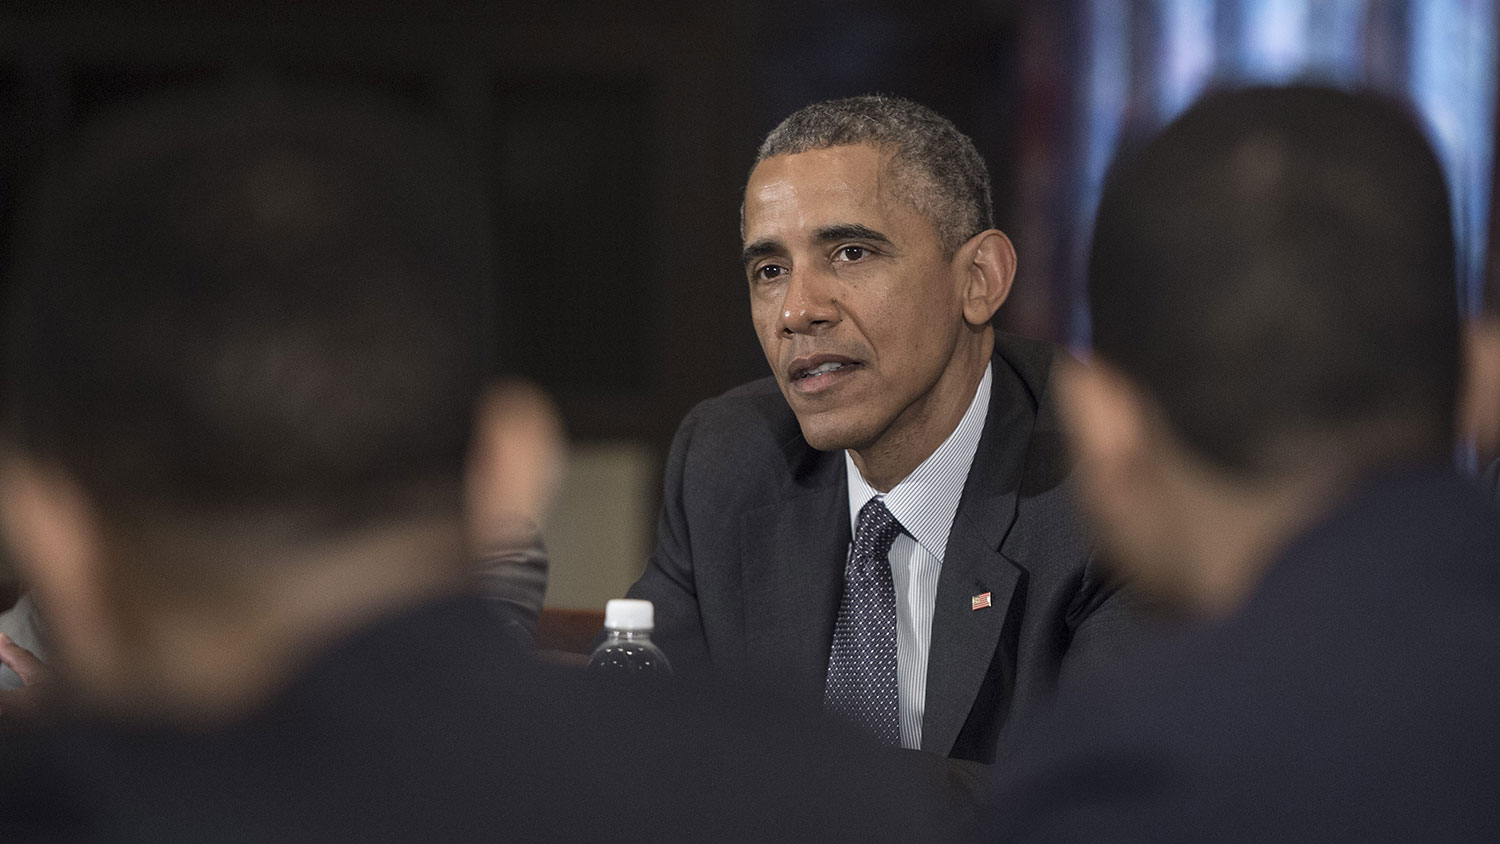 US President Barack Obama participates in a roundtable discussion with young people at an event at Lehman College launching the My Brothers Keeper Alliance, a new non-profit organization, in New York on May 4, 2015.
